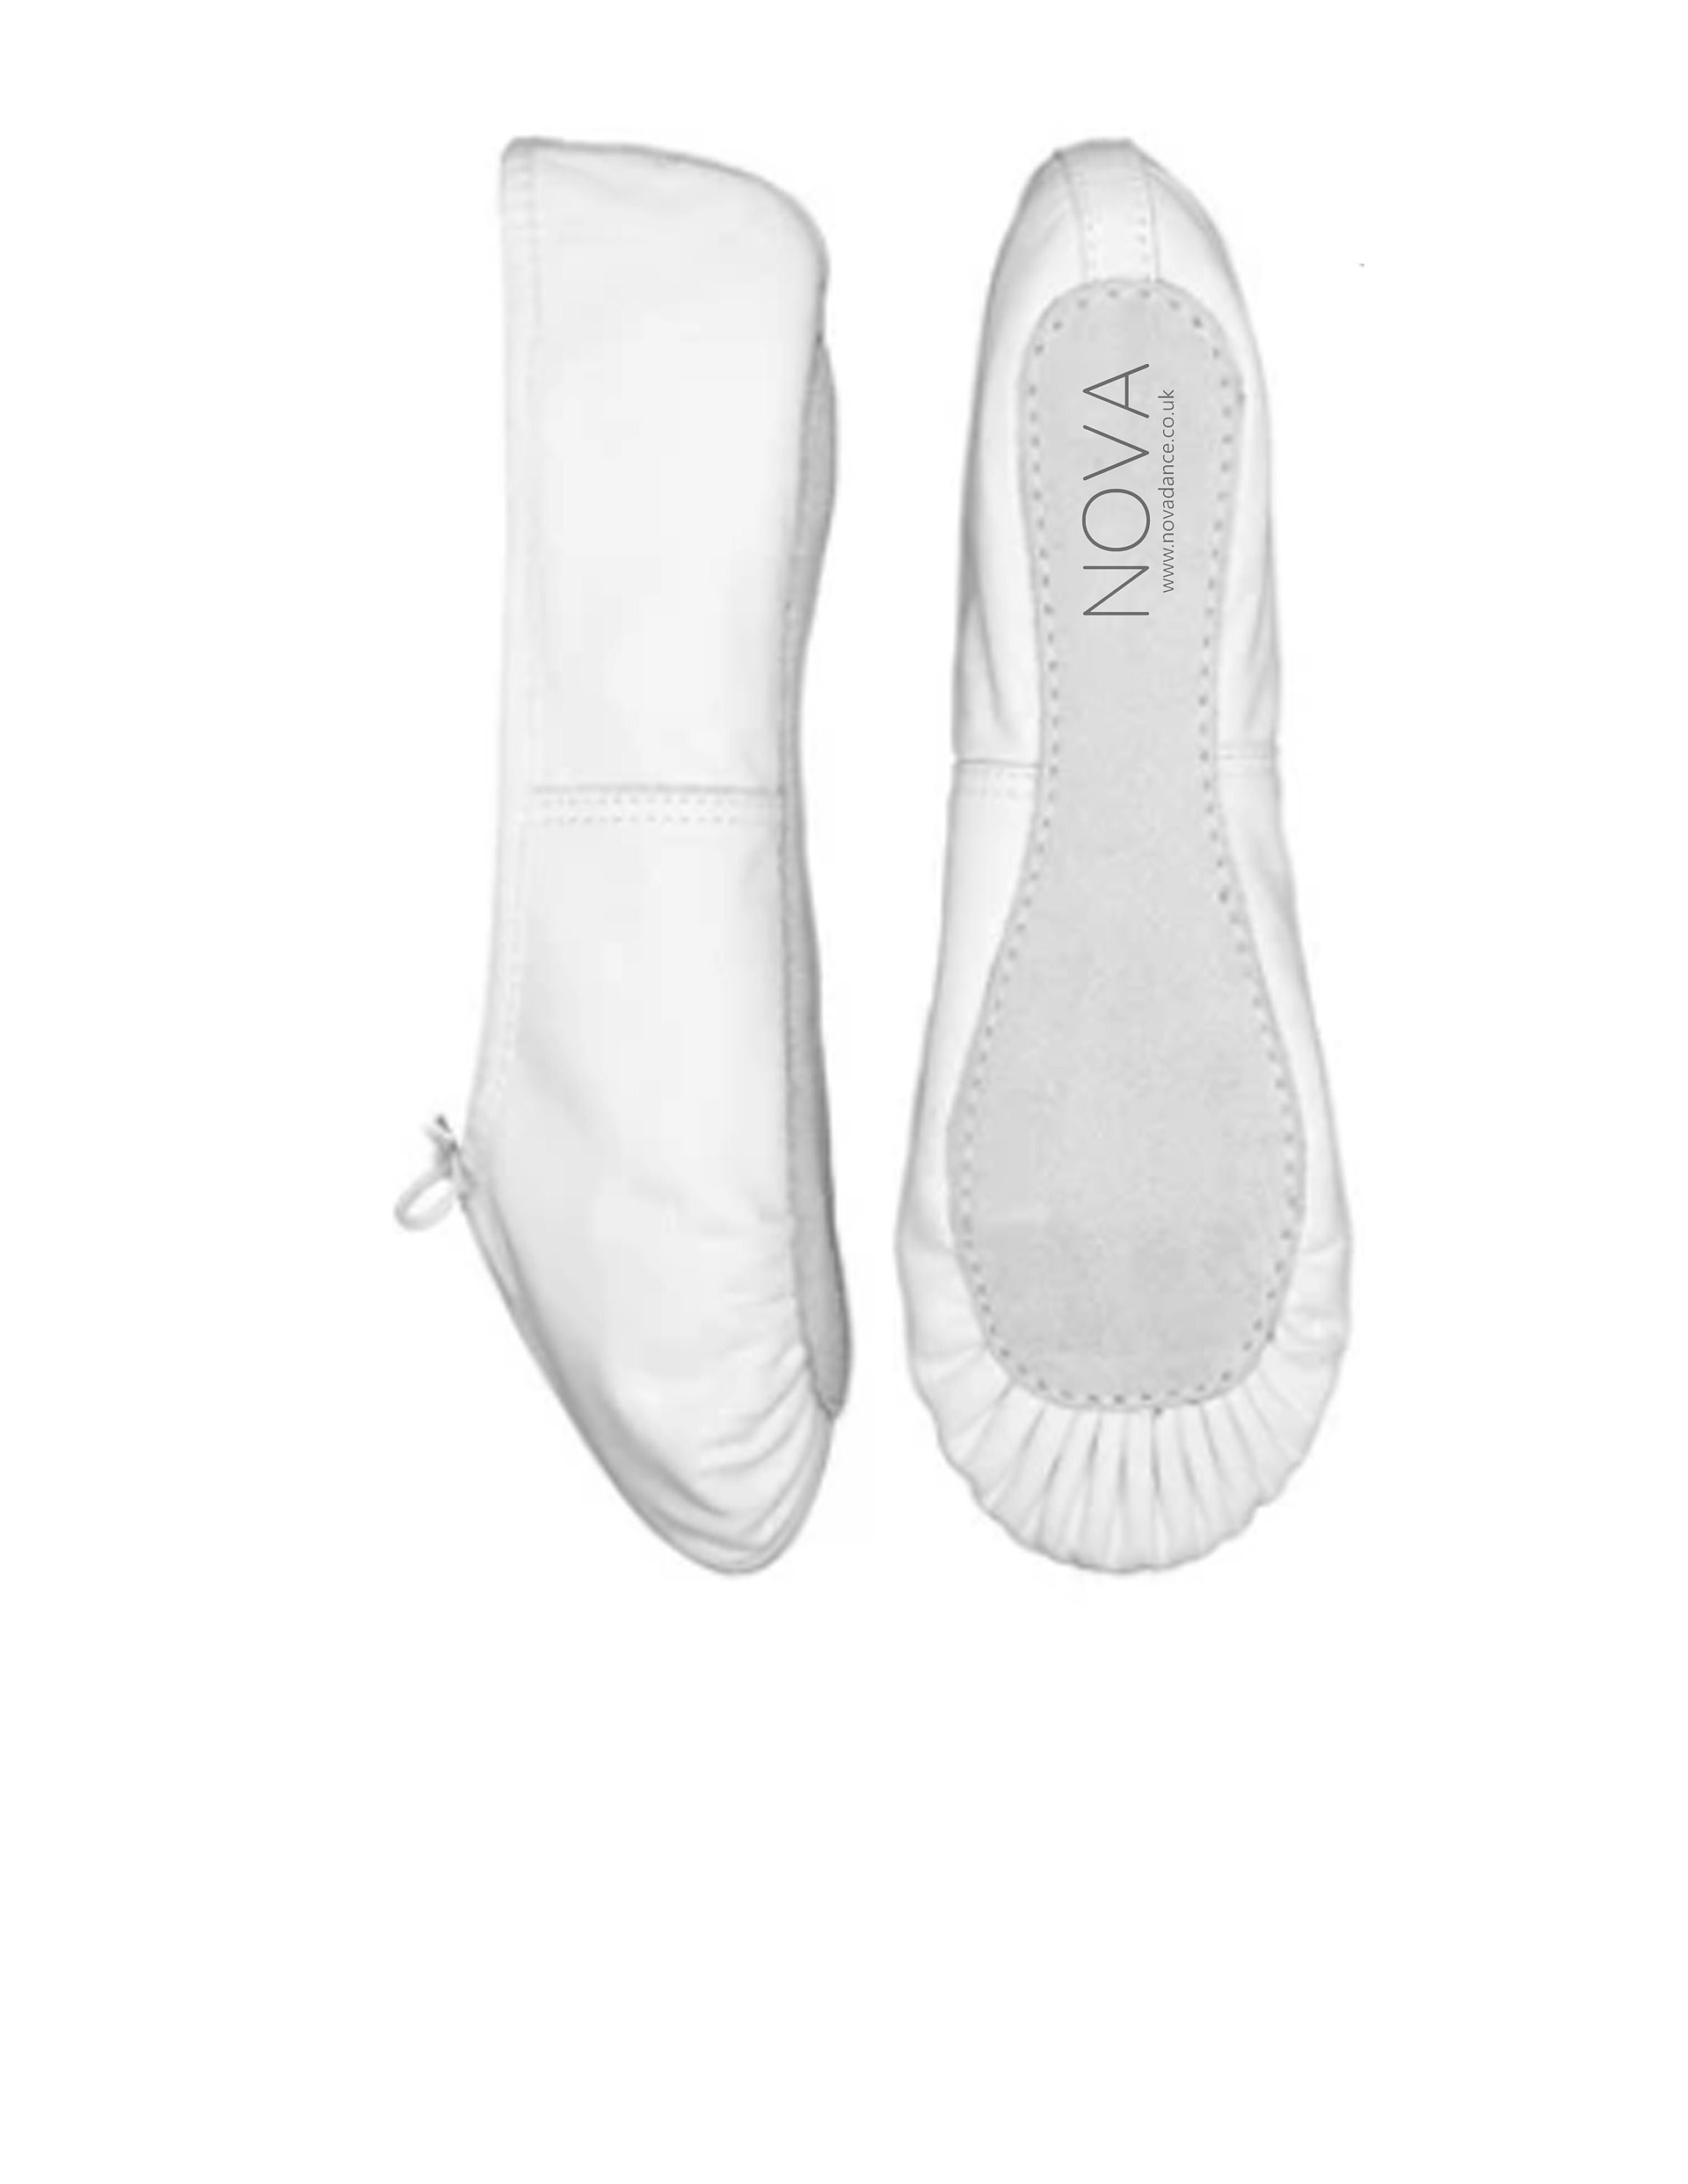 Black And White Ballet Shoes | lupon.gov.ph